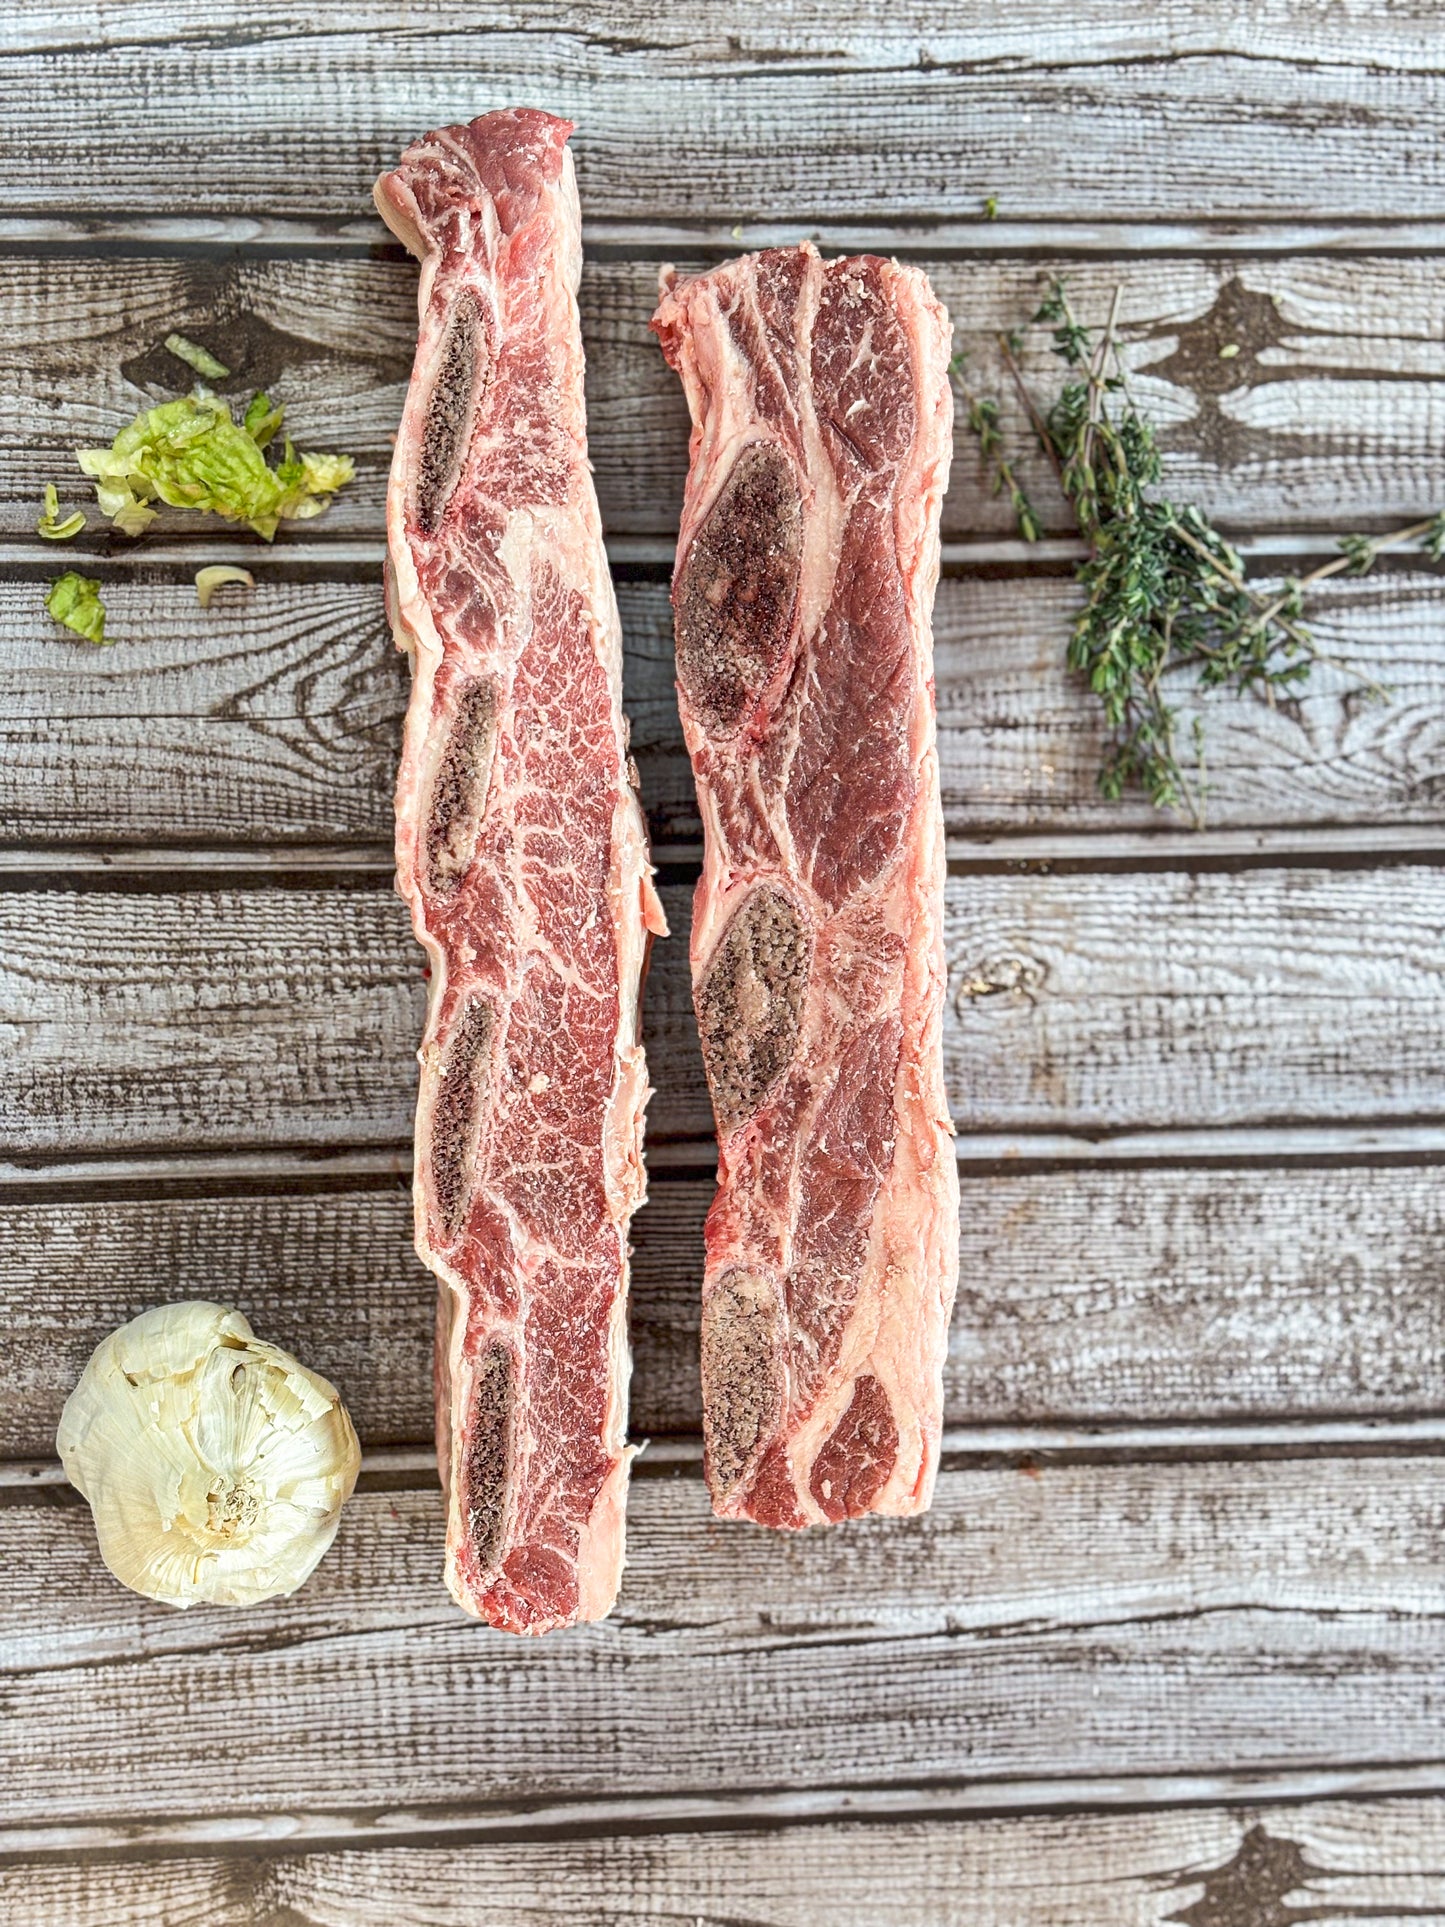 Short Ribs - Package of 2 - 3-4 lbs.